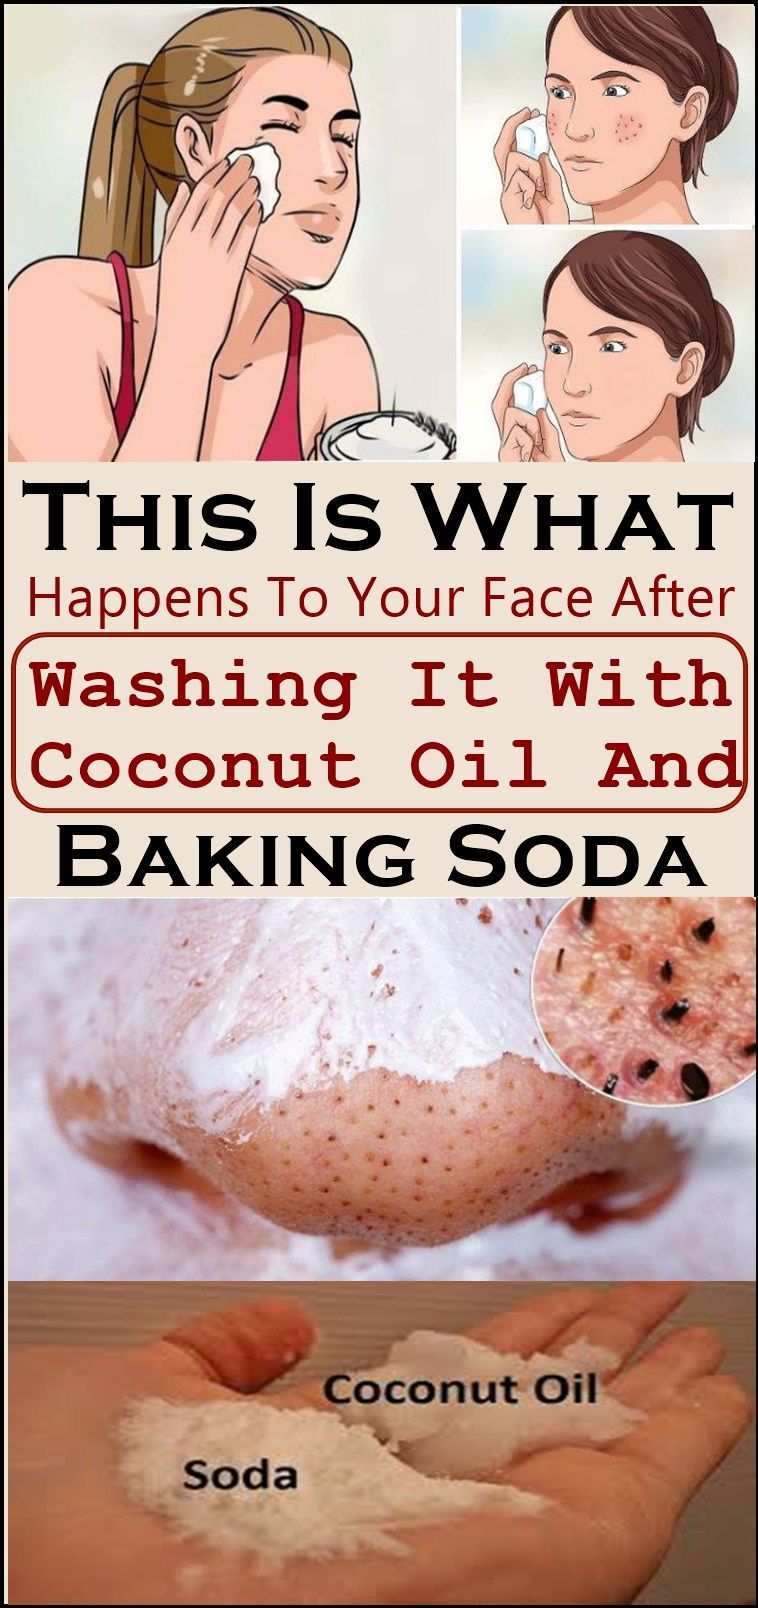 This Is What Happens To Your Face After Washing It With Coconut Oil And Baking Soda -   13 skin care Coconut Oil faces ideas